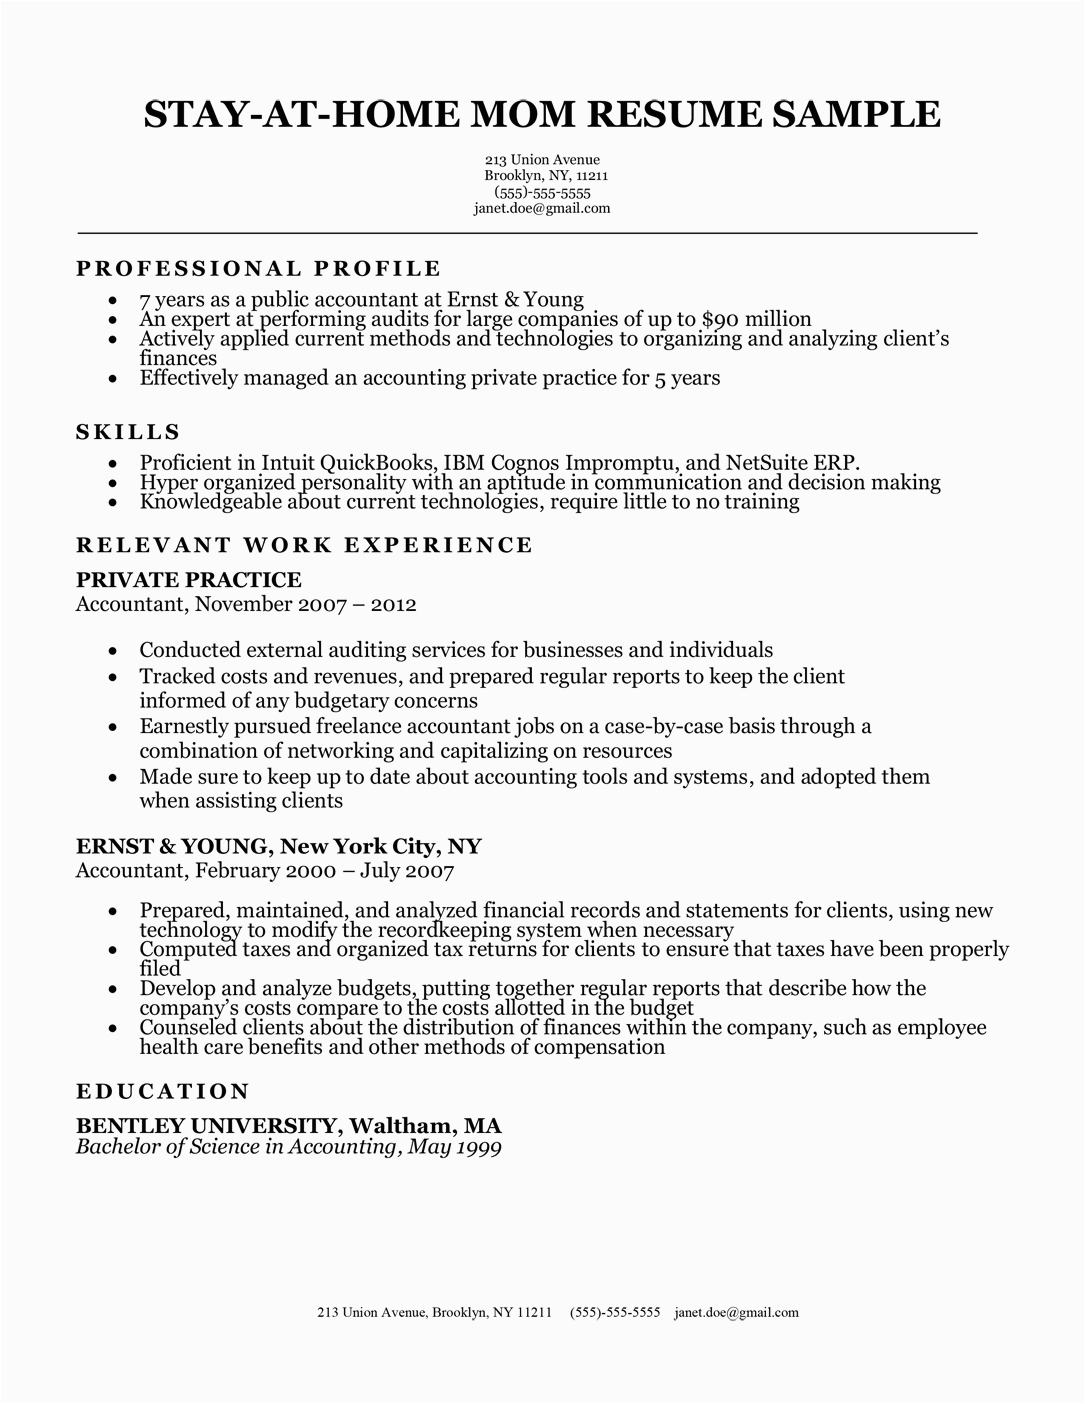 Best Stay at Home Resume Sample Stay at Home Mom Resume Sample & Writing Tips